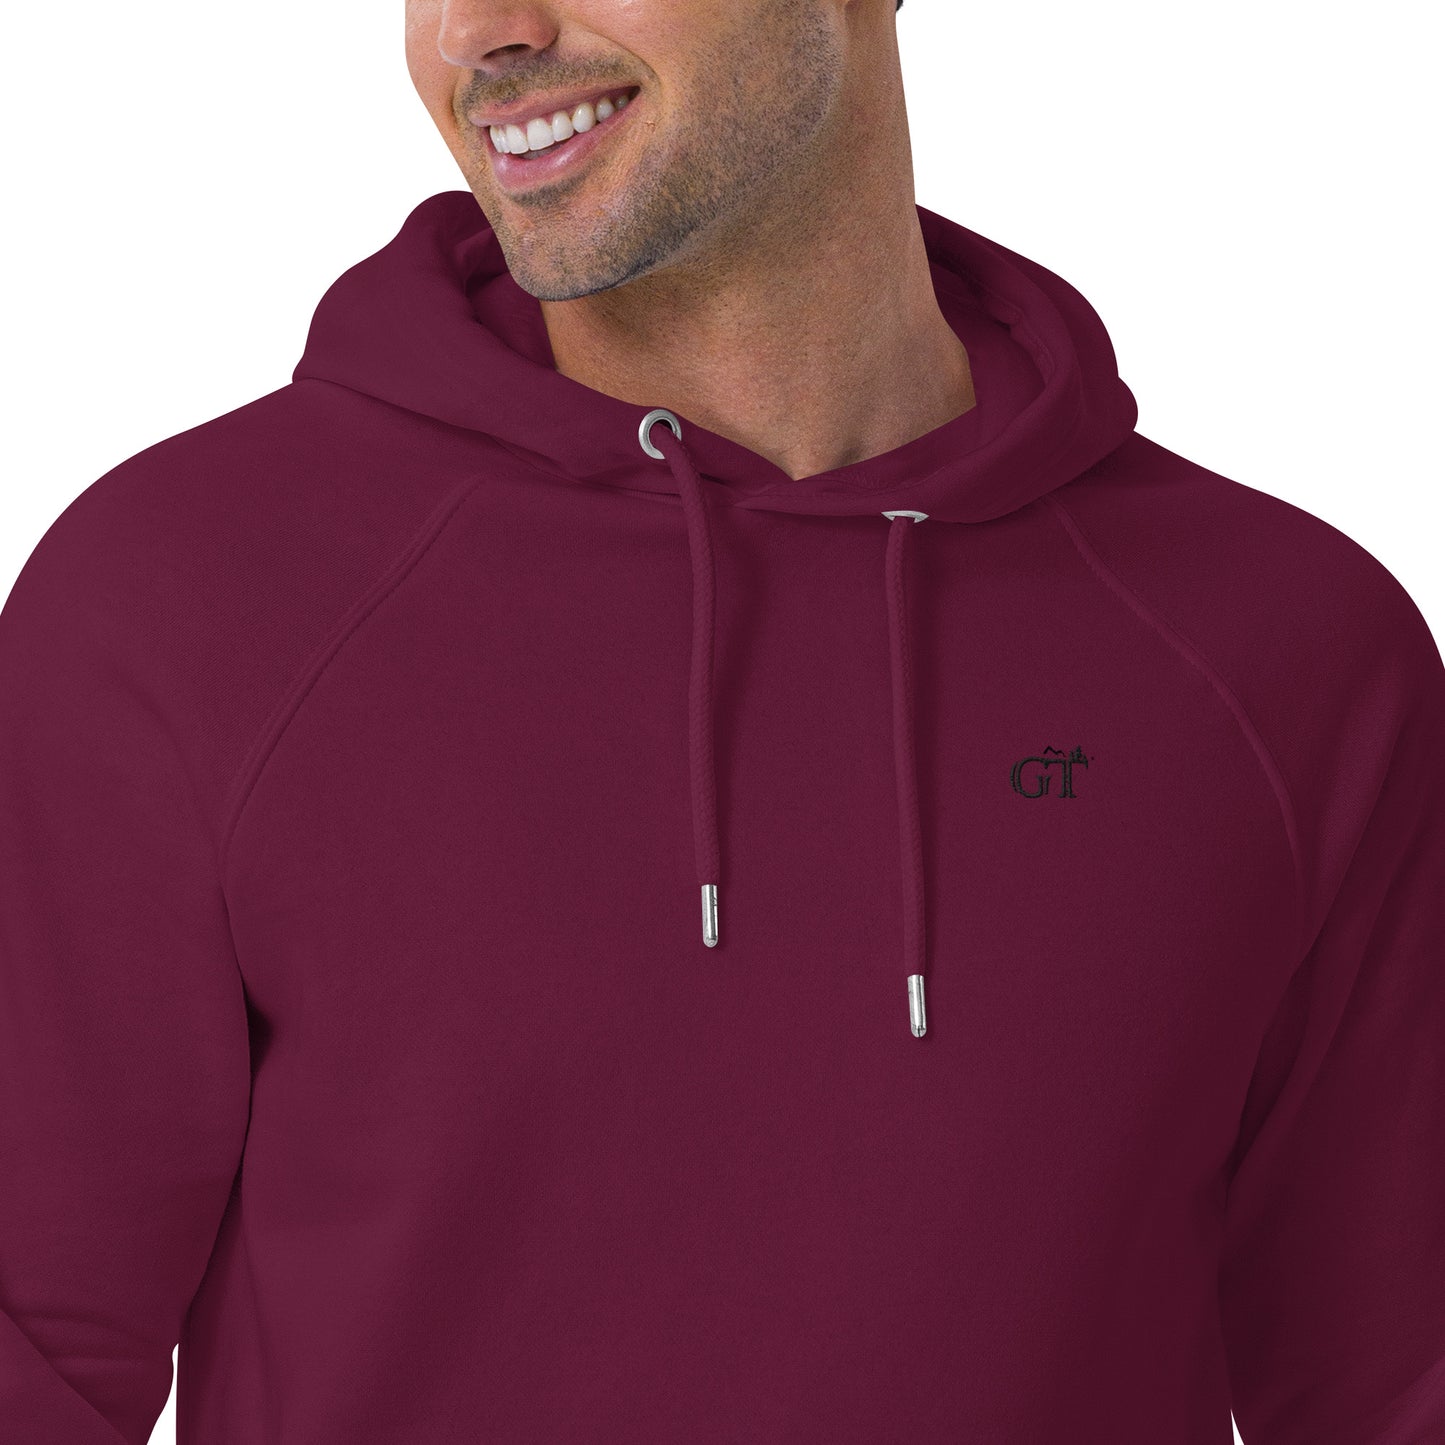 GT Eco Embroidered Organic Men's Hoodie